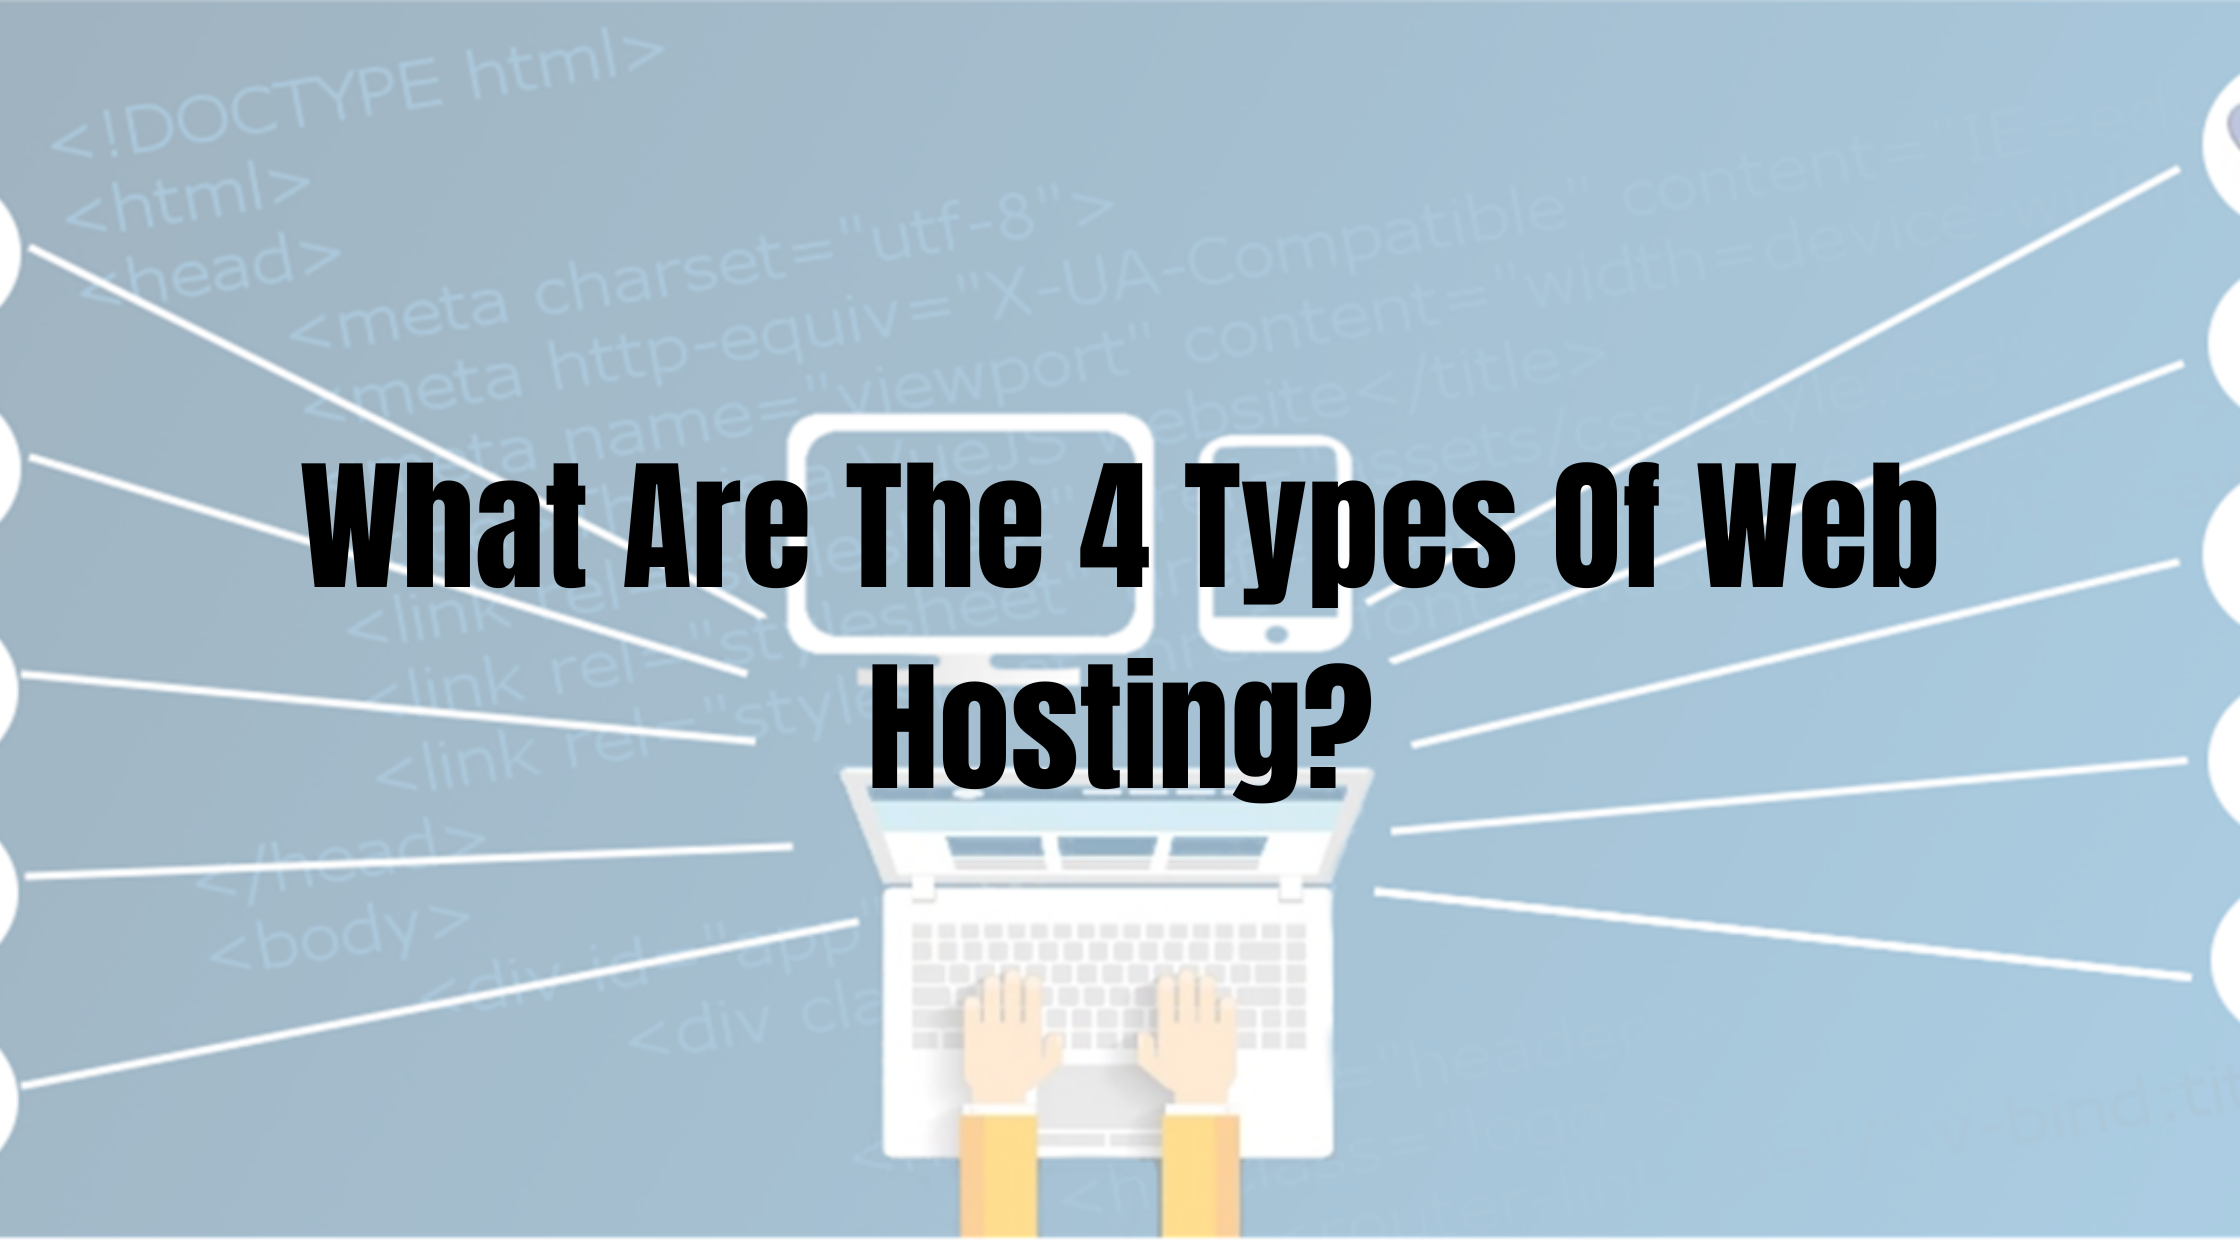 What Are The 4 Types Of Web Hosting